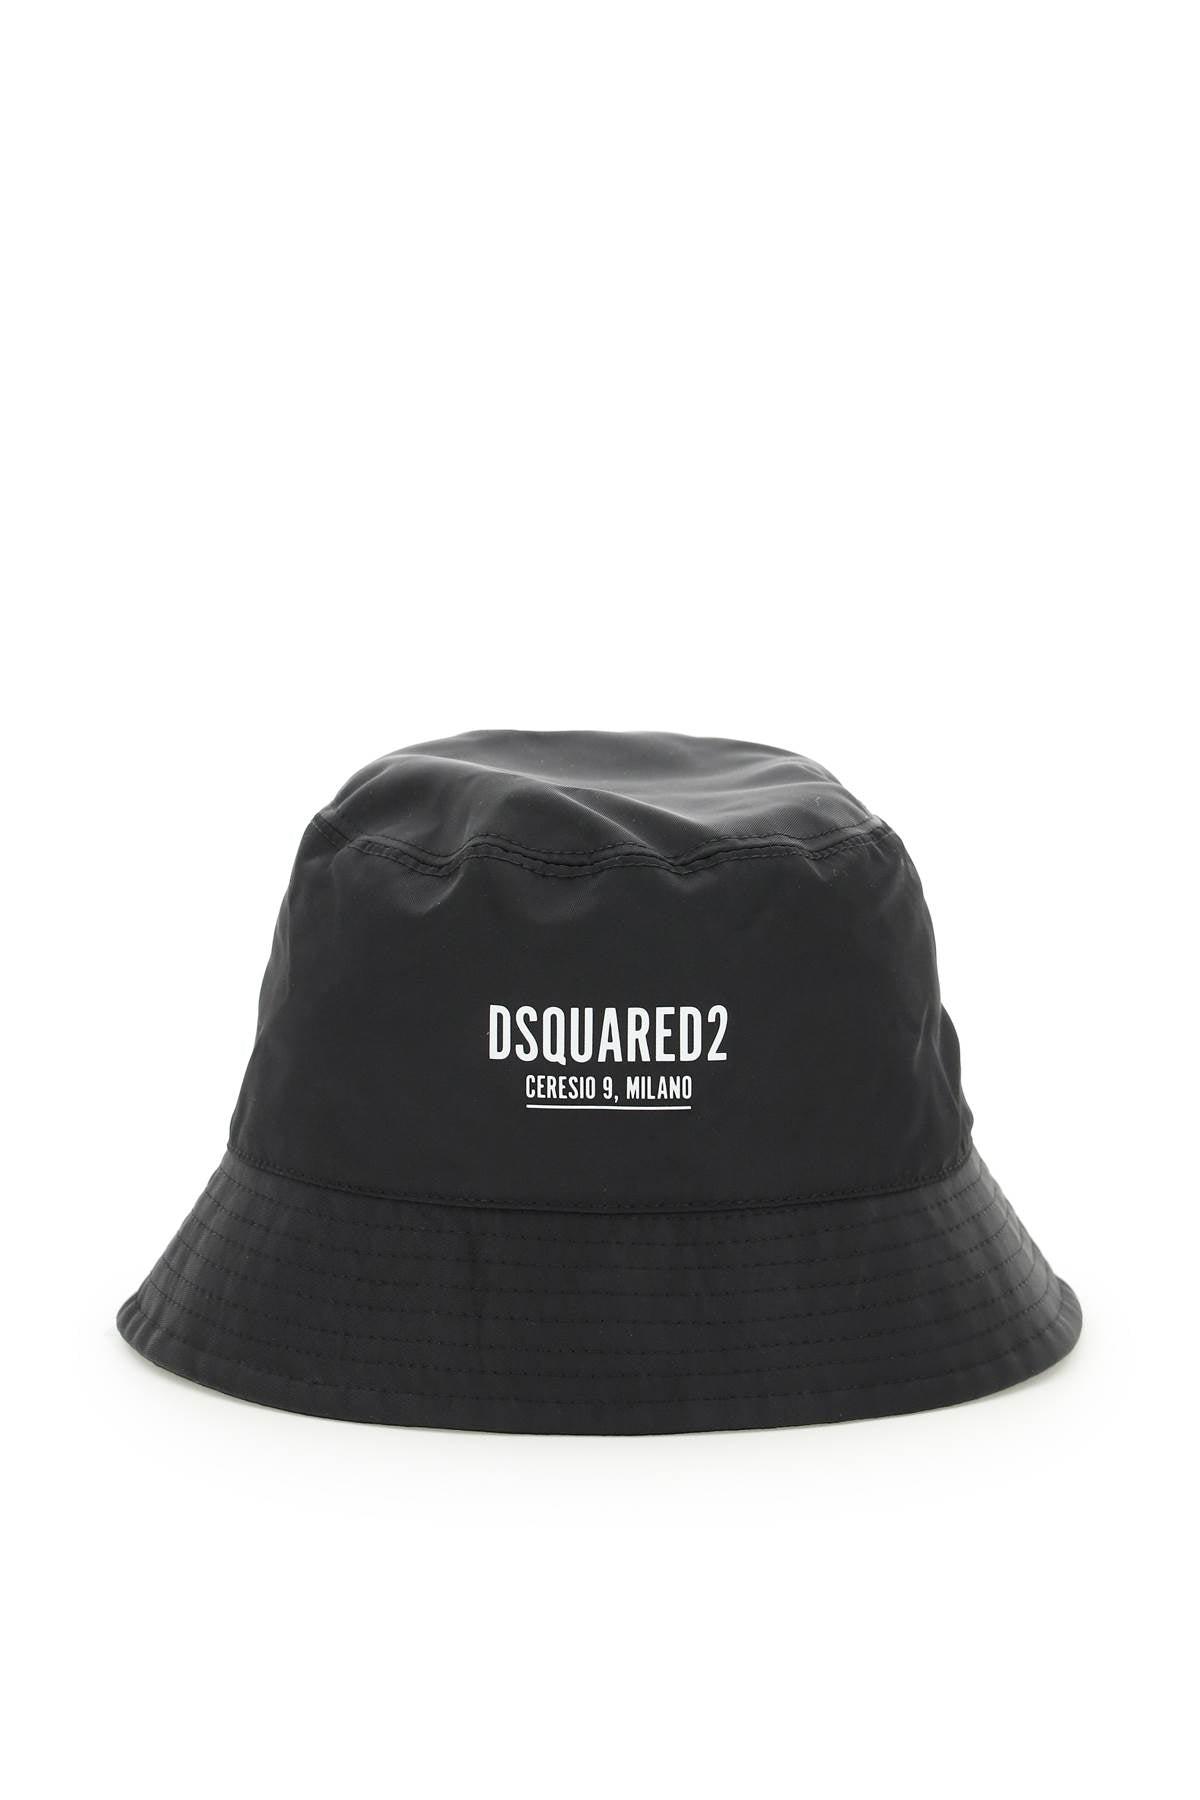 DSquared² Synthetic 'ceresio 9' Bucket Hat in Black for Men | Lyst